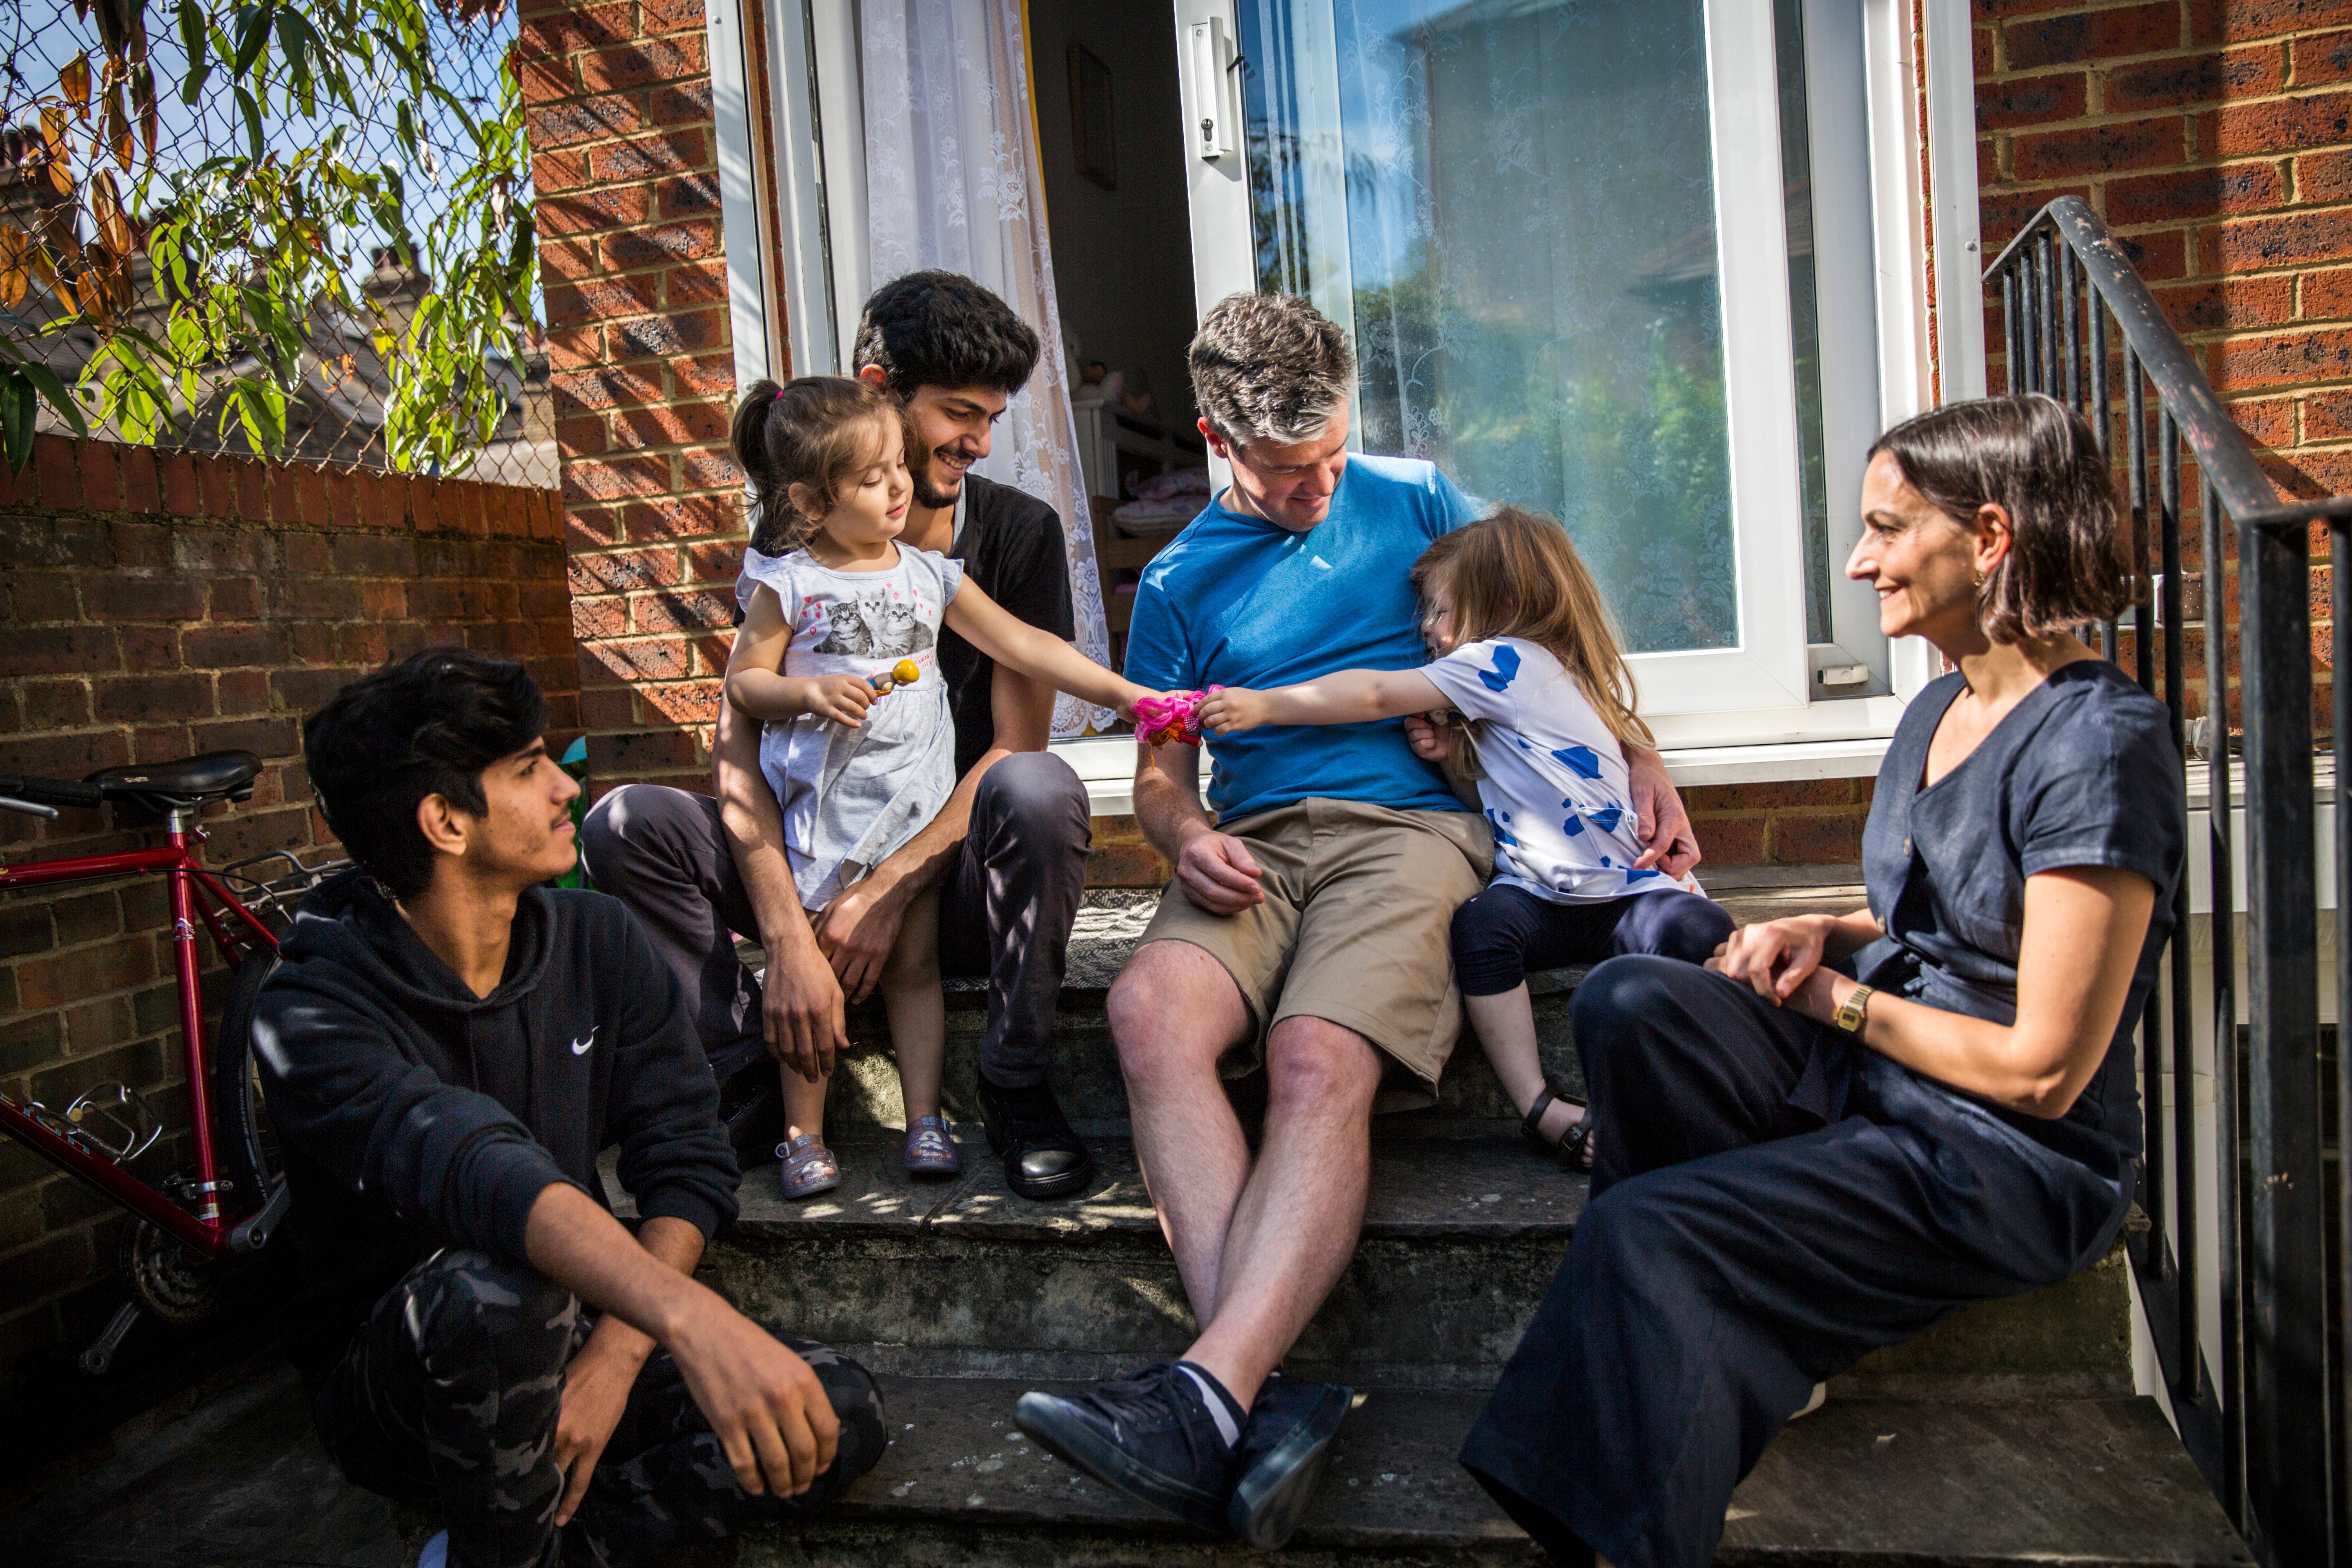 James Lynch (in blue), his daughter, and Claire Tillotson (right), from the Peckham Sponsors Refugees local residents group, socialise with Mohammed Al-Shaabin (top-left), his daughter Celen, and his brother Islam – all of whom fled Syria in 2011 – outside their home in south London